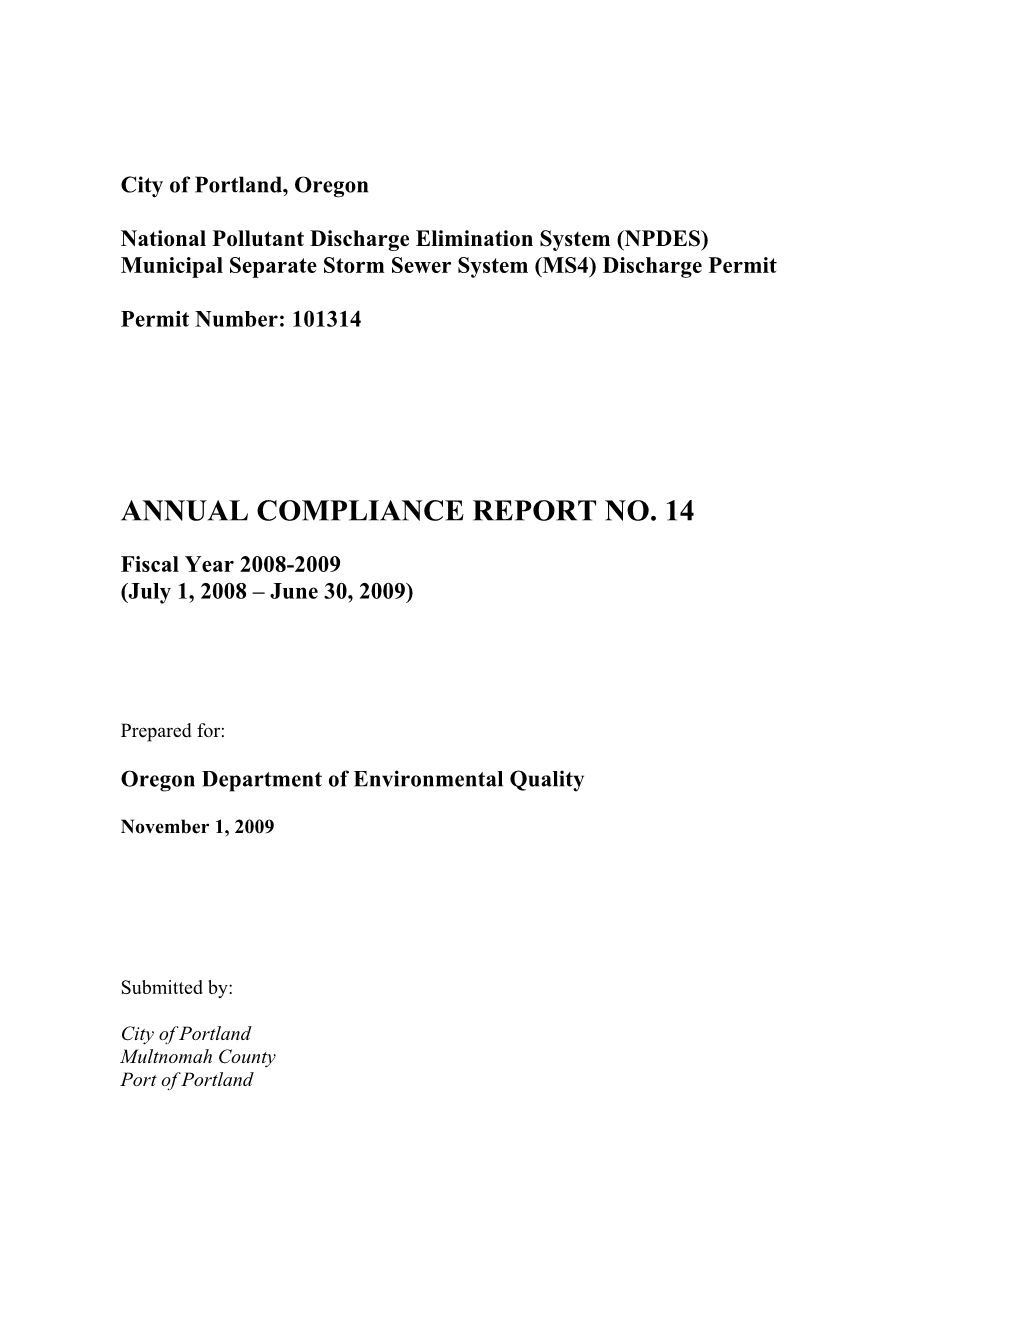 FY 2008-2009 Permit Year 14 Annual Compliance Report